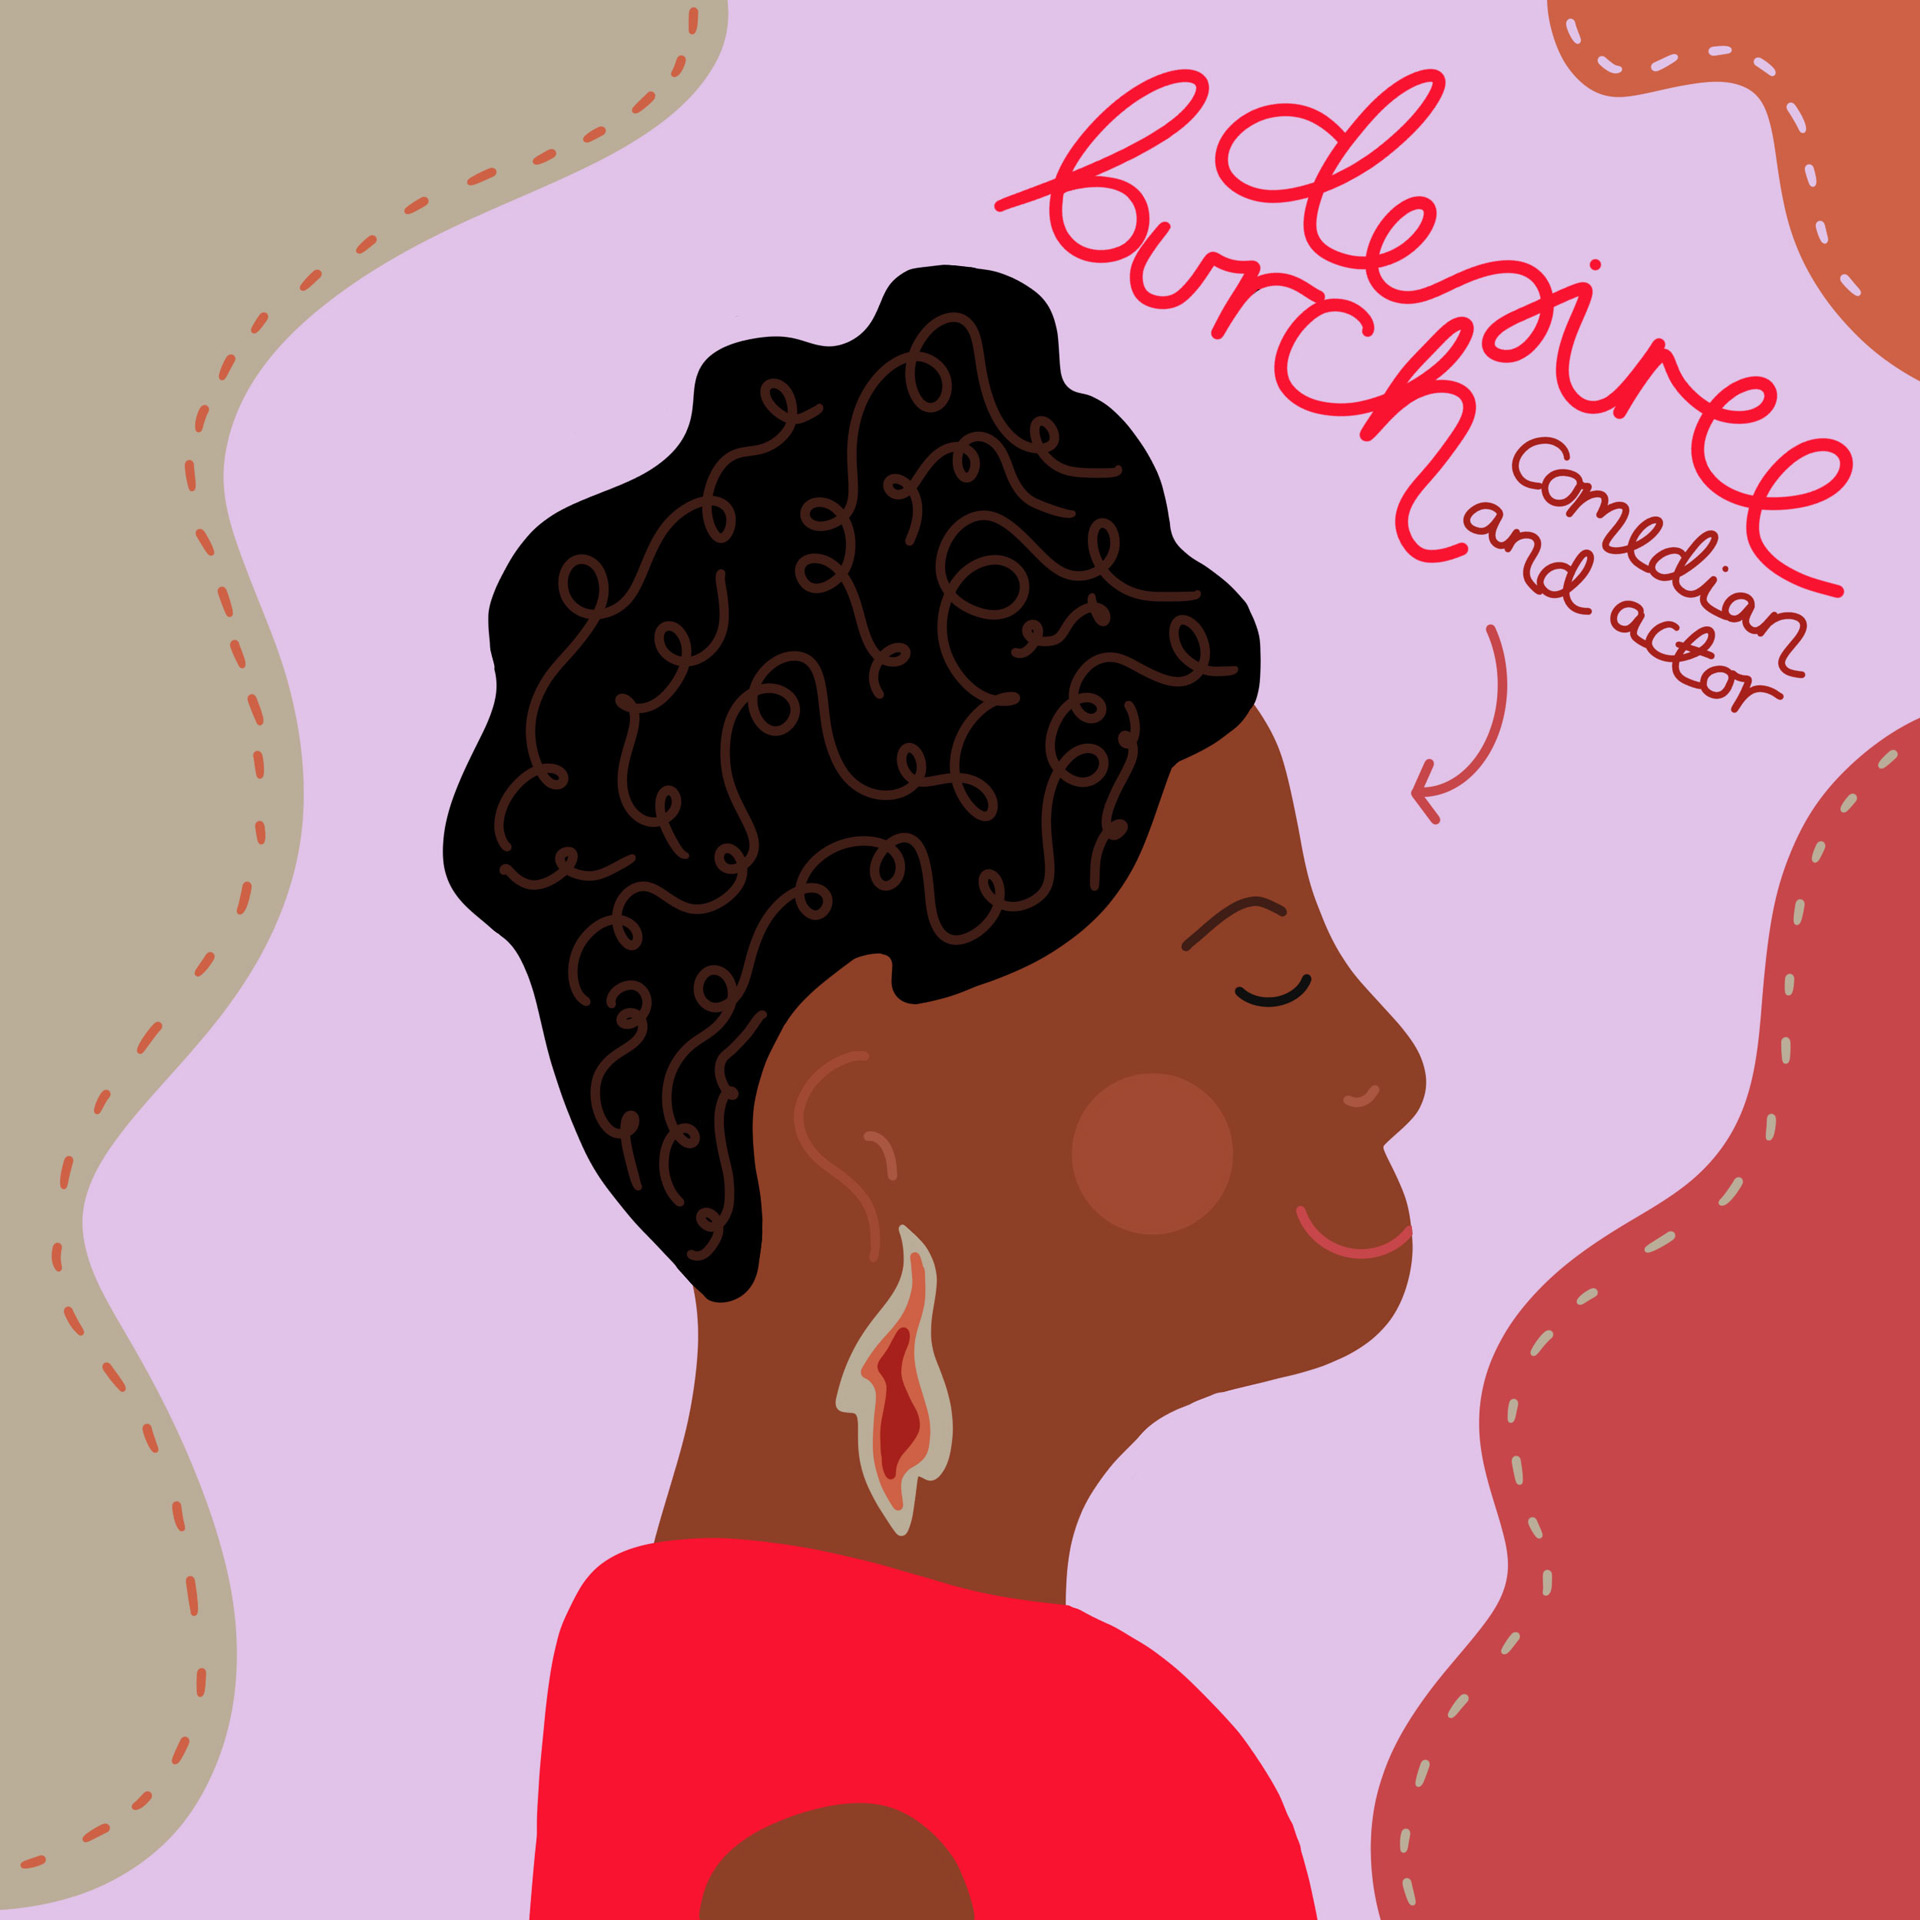 A side-profile portrait of Desiree Burch illustrated in a whimsical and playful illustration style. Desiree is depicted front-and-centre in a square image, against a wavy background of green, lilac, and red. A hand-drawn caption accompanies the portrait, stating 'Desiree Burch: Comedian and Actor'. 